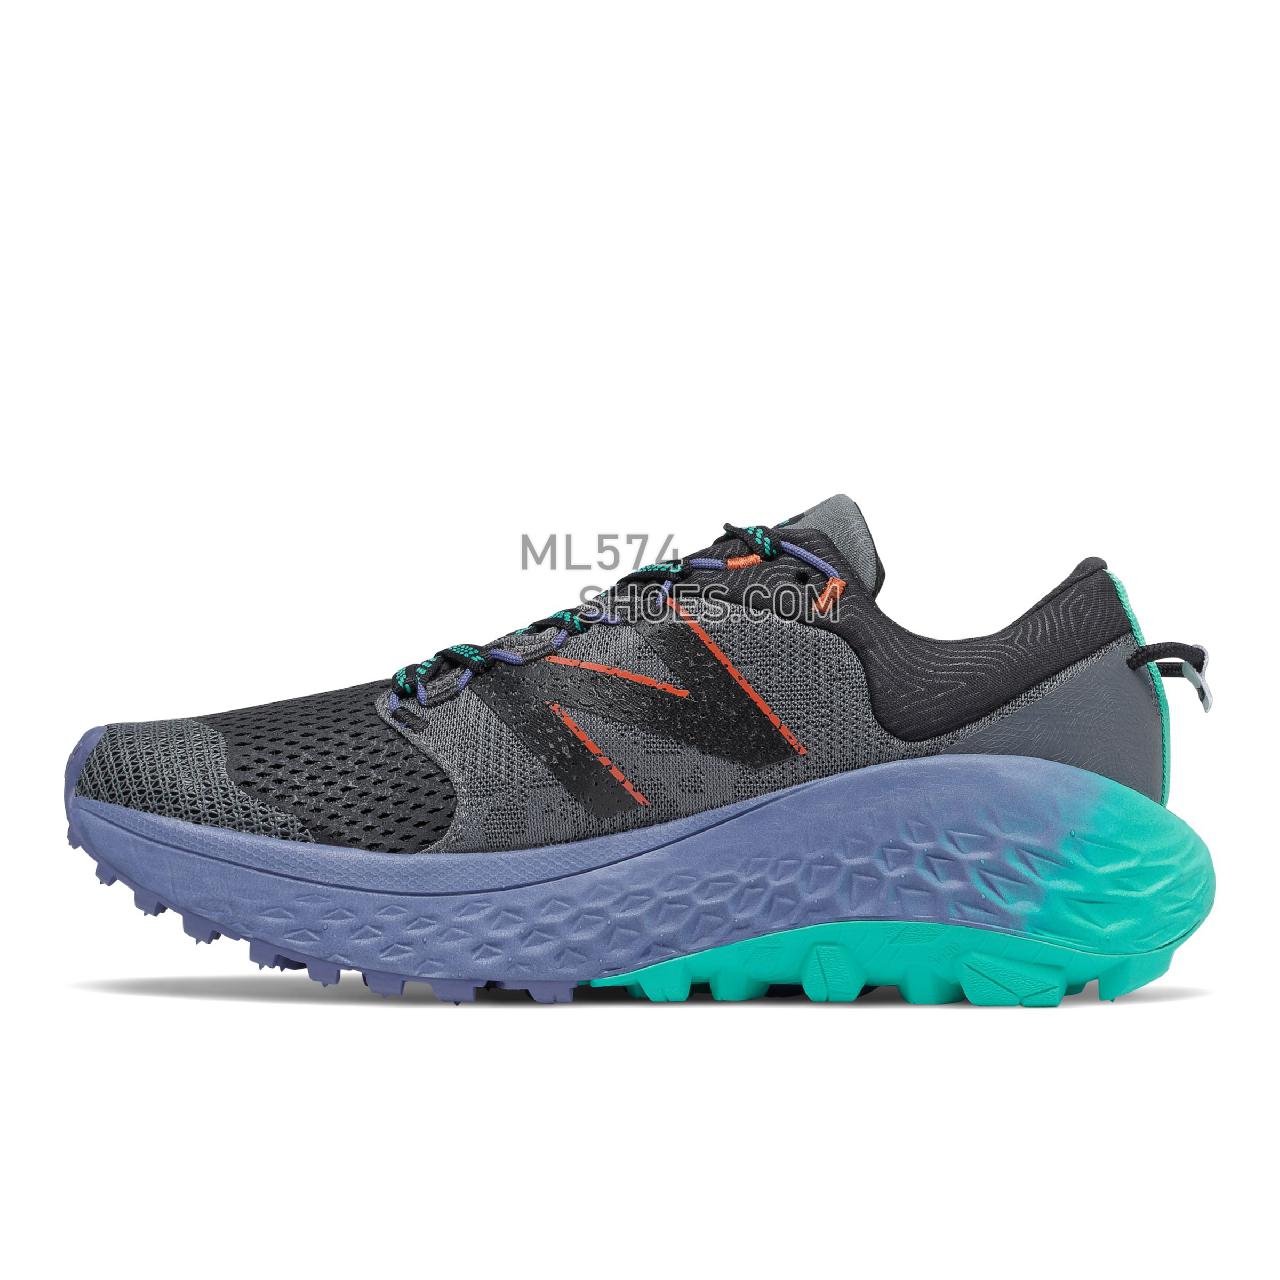 New Balance Fresh Foam More Trail v1 - Women's Trail Running - Lead with Magnetic Blue - WTMORGG